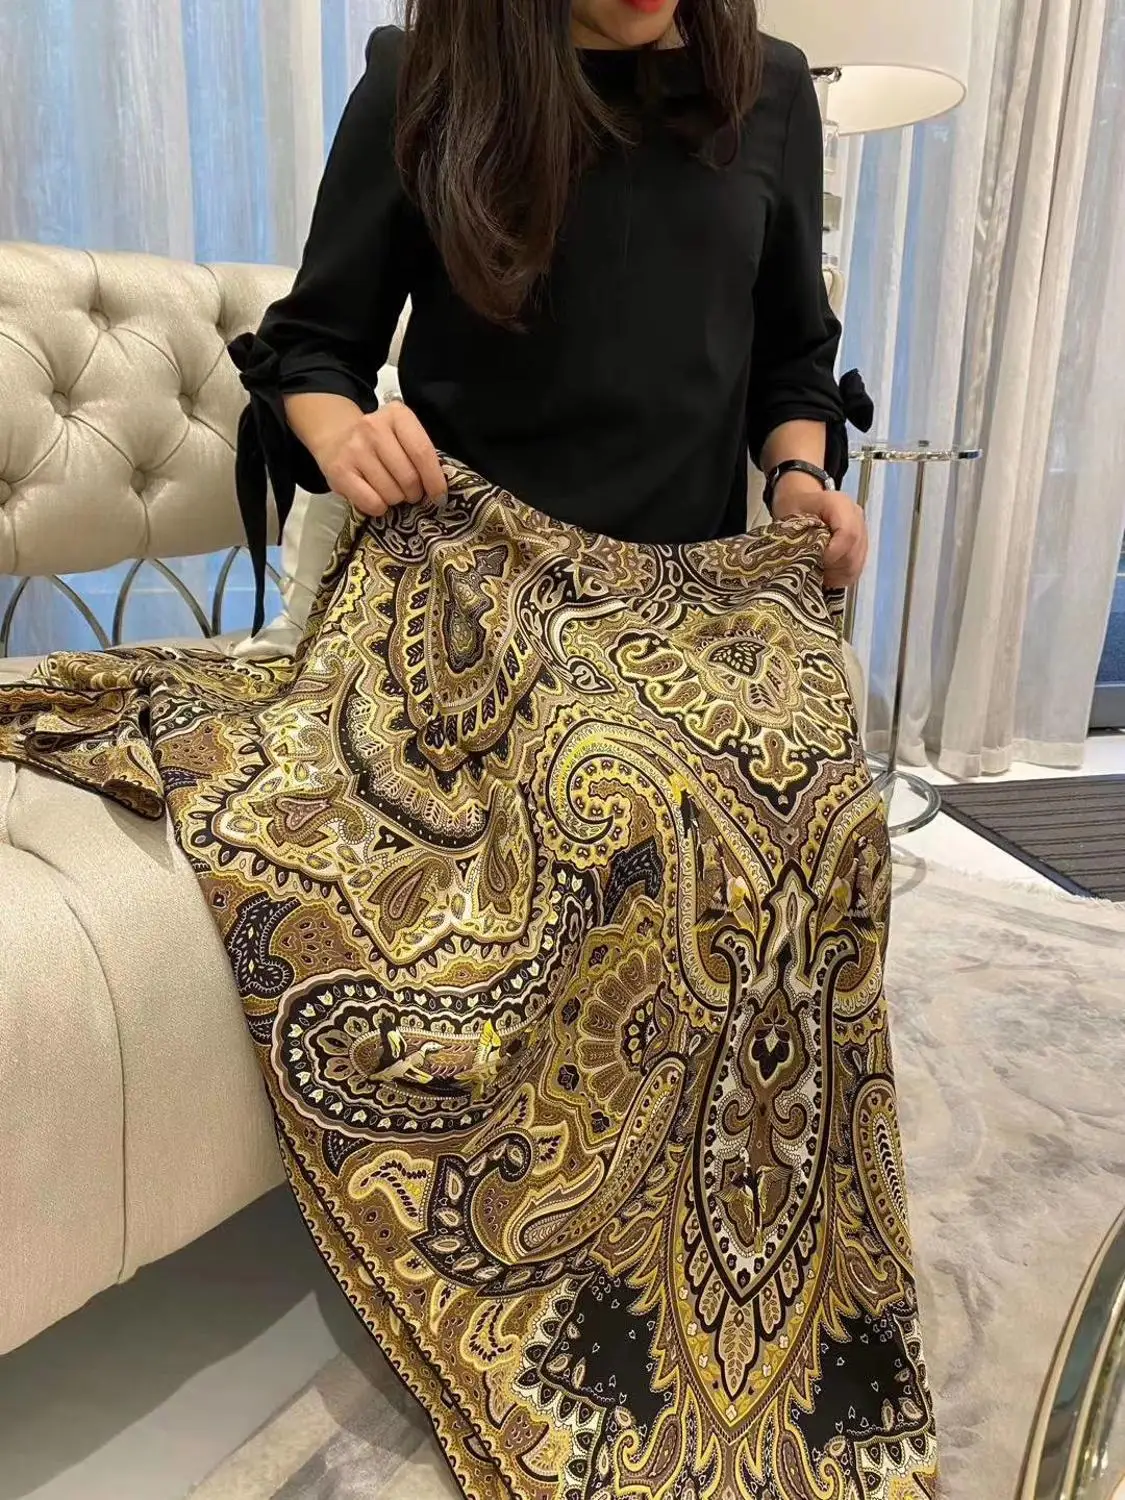 KMS Classic Paisley Silk Twill Sand-Washed Scarf Shawl for Girl Lady Women  140*140CM/110G